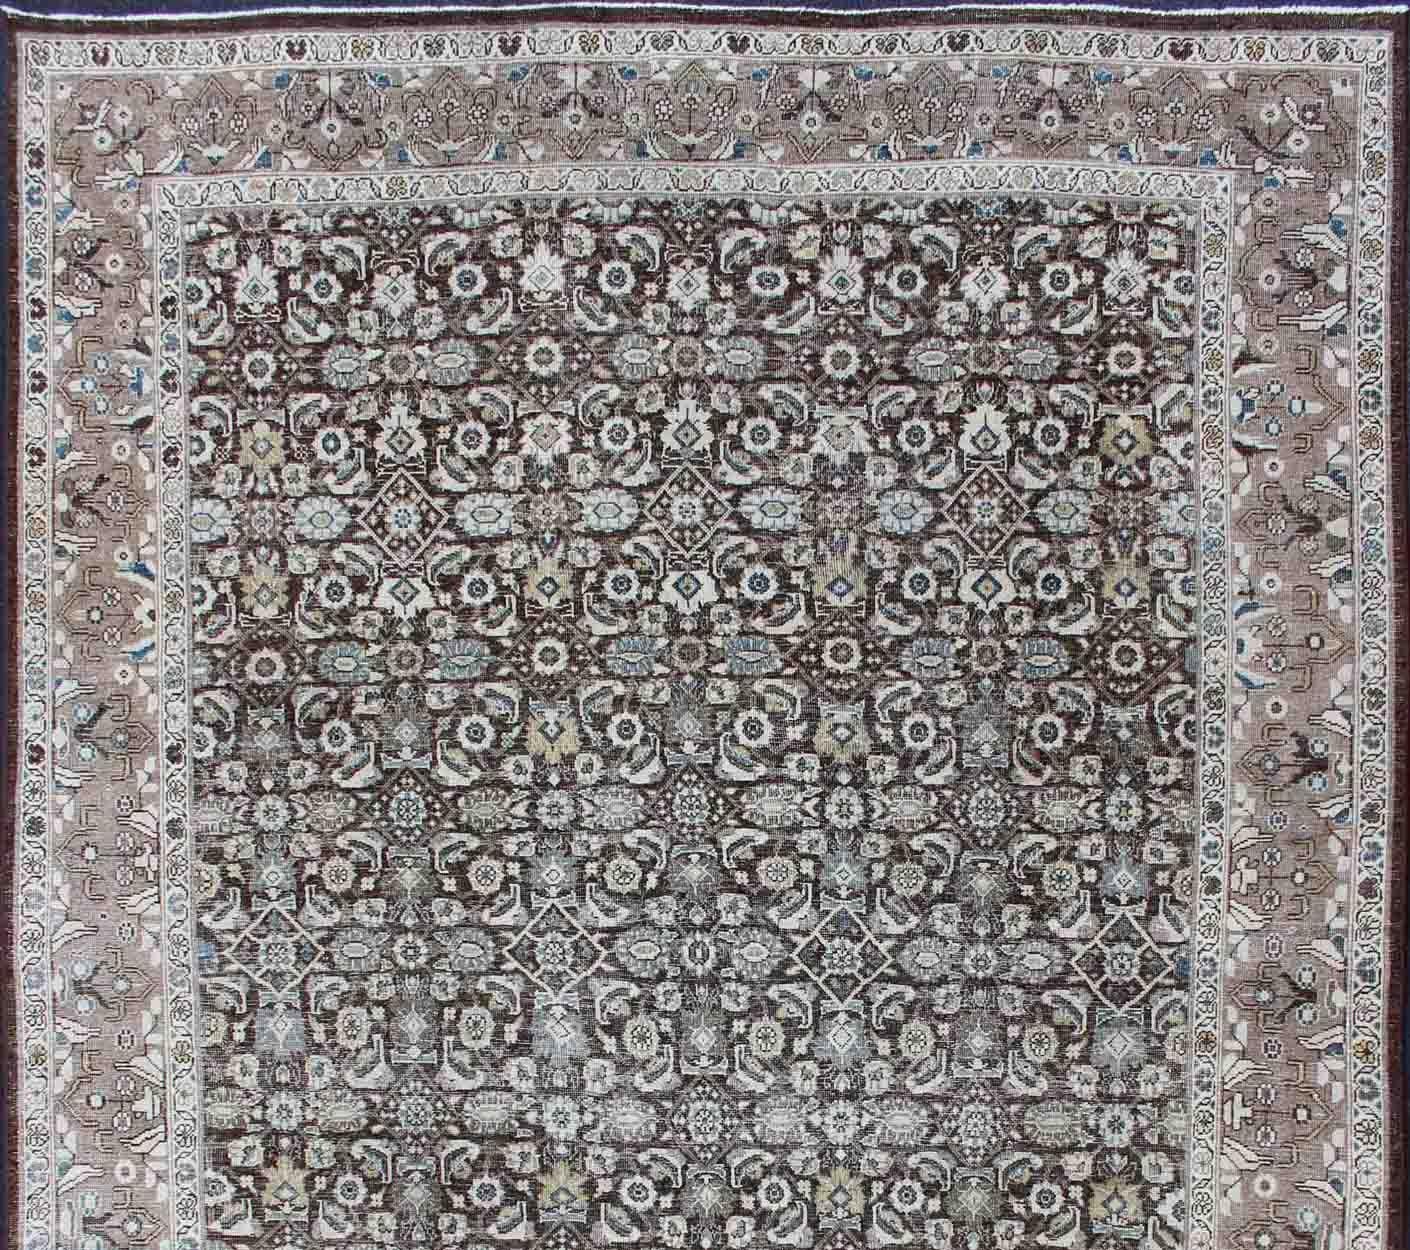 Chocolate background and light brown border antique Persian Tabriz rug with all-over Herati design and geometric border, rug SUS-2007-285, country of origin / type: Iran / Tabriz, circa 1930

This antique Persian Tabriz rug was handwoven in the